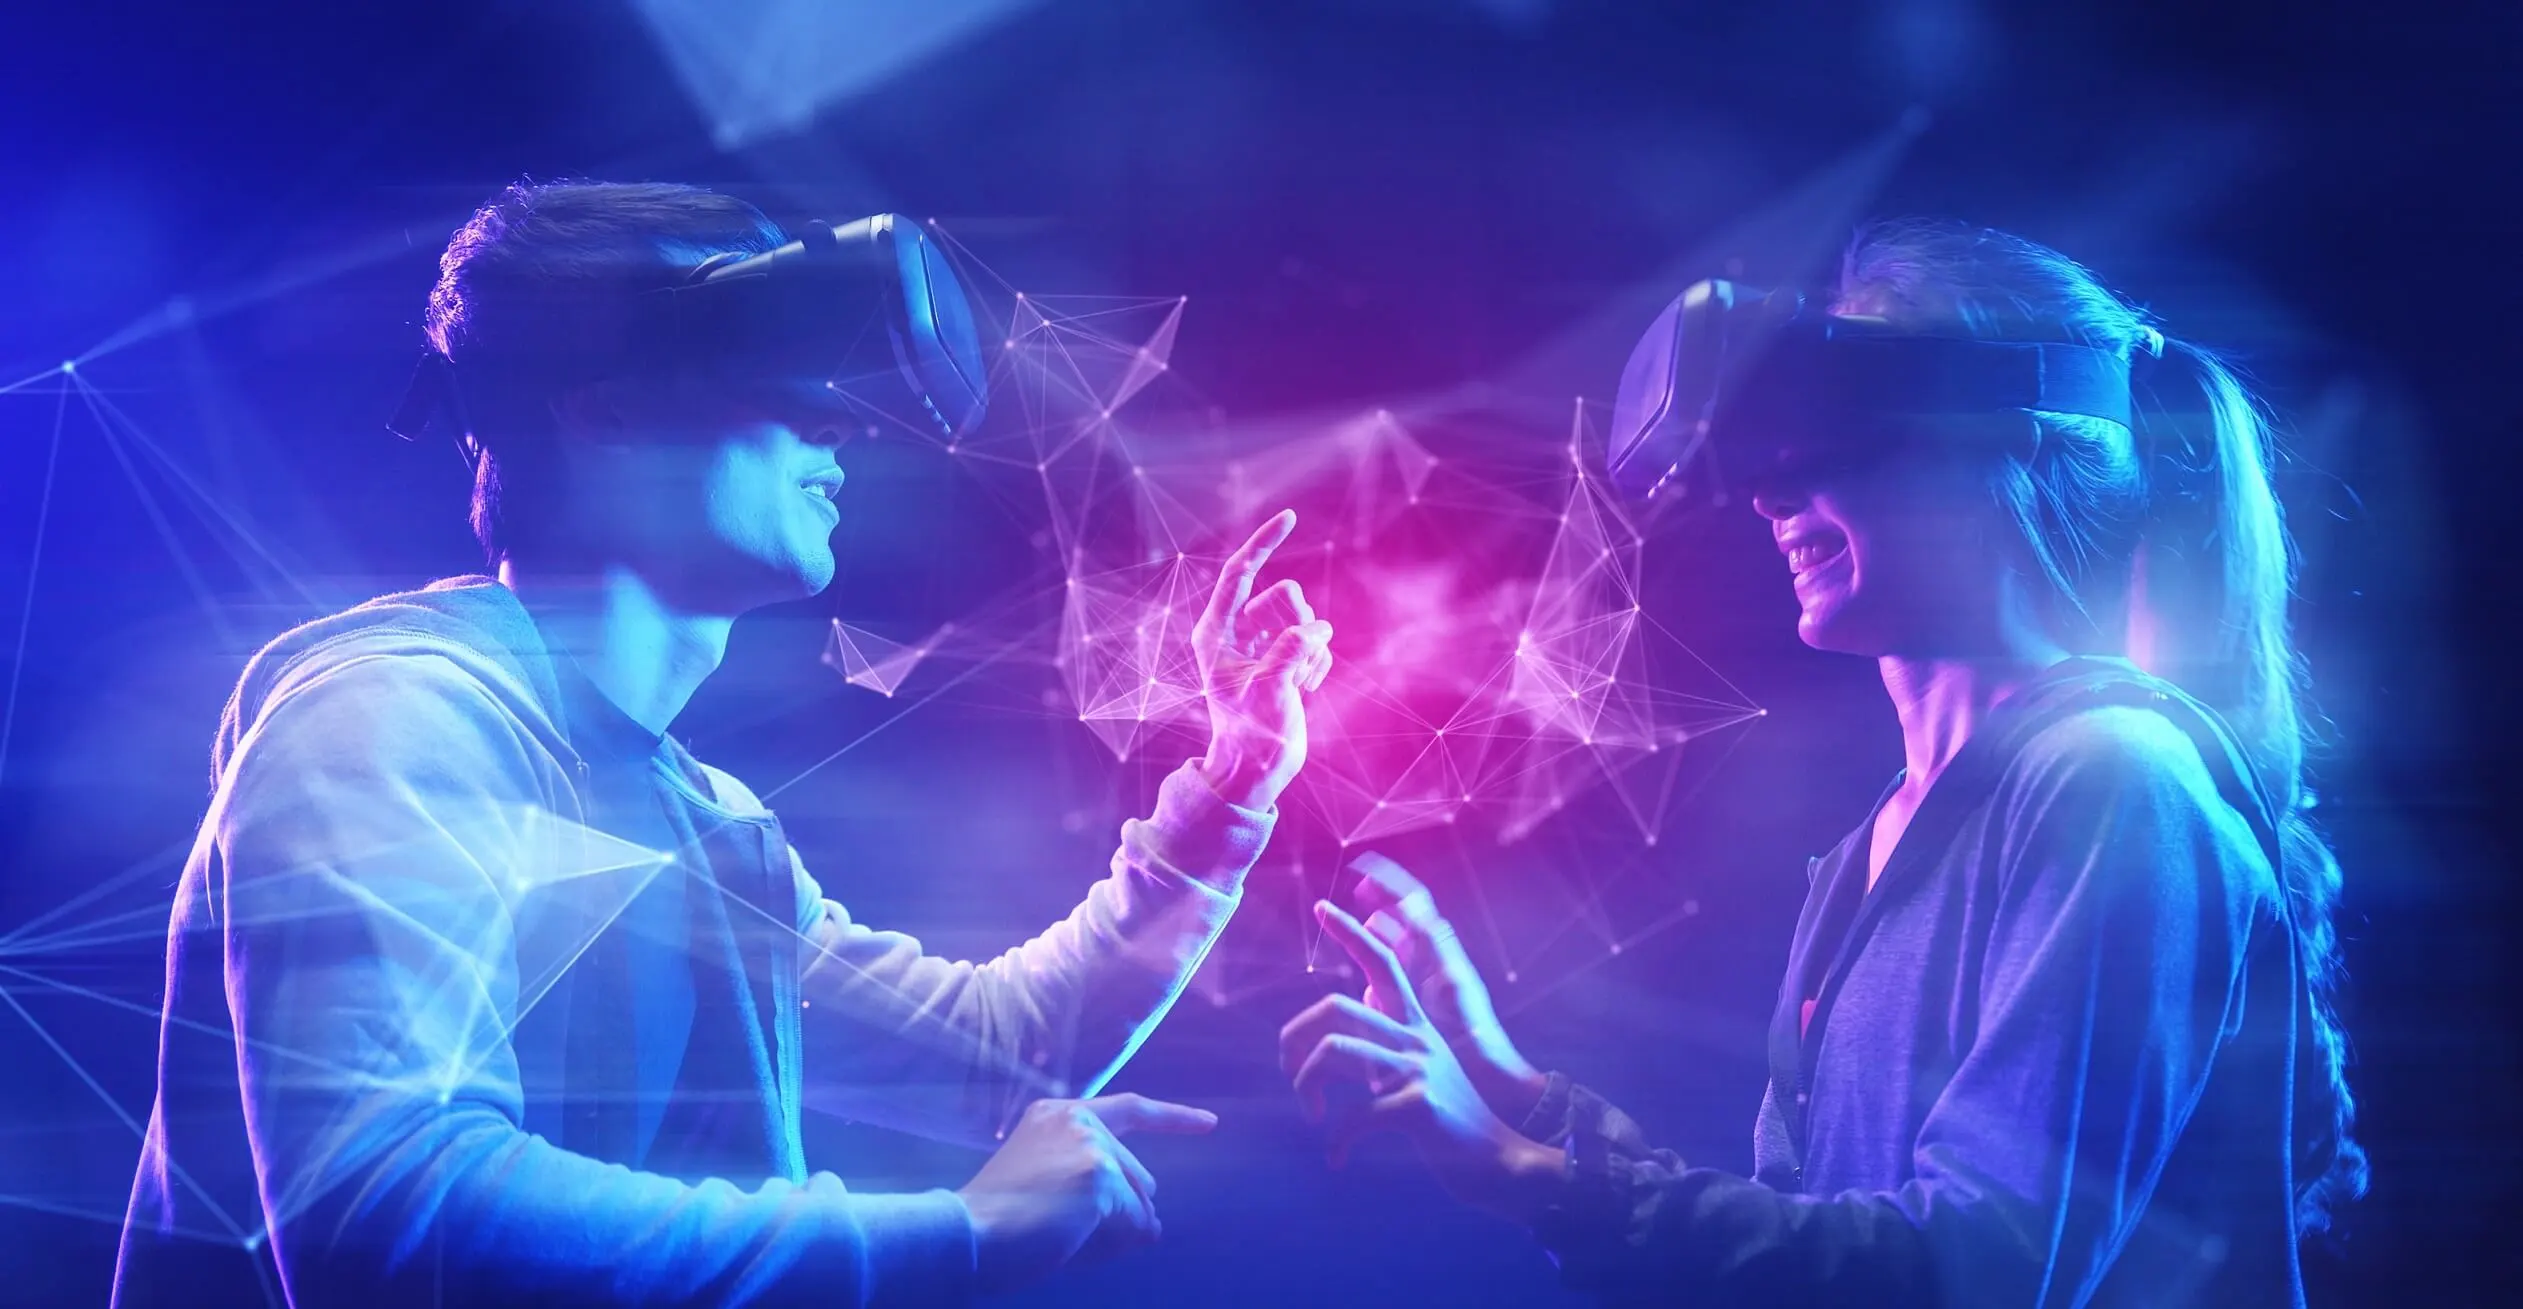 Metaverse Refers to a Digital Combination of Virtual Worlds Accessible with Specific Tools